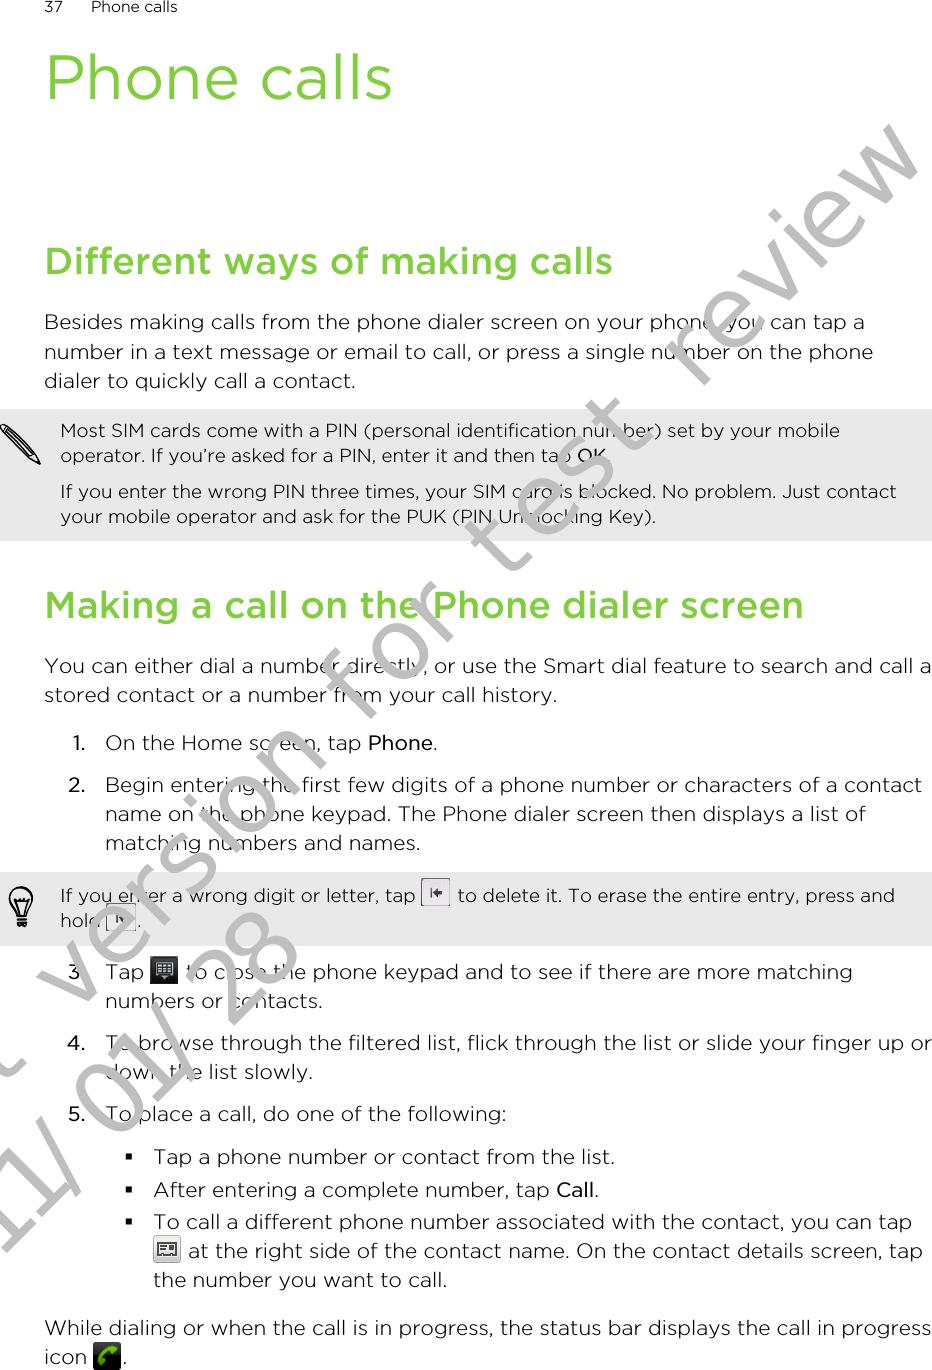 Phone callsDifferent ways of making callsBesides making calls from the phone dialer screen on your phone, you can tap anumber in a text message or email to call, or press a single number on the phonedialer to quickly call a contact.Most SIM cards come with a PIN (personal identification number) set by your mobileoperator. If you’re asked for a PIN, enter it and then tap OK.If you enter the wrong PIN three times, your SIM card is blocked. No problem. Just contactyour mobile operator and ask for the PUK (PIN Unblocking Key).Making a call on the Phone dialer screenYou can either dial a number directly, or use the Smart dial feature to search and call astored contact or a number from your call history.1. On the Home screen, tap Phone.2. Begin entering the first few digits of a phone number or characters of a contactname on the phone keypad. The Phone dialer screen then displays a list ofmatching numbers and names.If you enter a wrong digit or letter, tap   to delete it. To erase the entire entry, press andhold  .3. Tap   to close the phone keypad and to see if there are more matchingnumbers or contacts.4. To browse through the filtered list, flick through the list or slide your finger up ordown the list slowly.5. To place a call, do one of the following:§Tap a phone number or contact from the list.§After entering a complete number, tap Call.§To call a different phone number associated with the contact, you can tap at the right side of the contact name. On the contact details screen, tapthe number you want to call.While dialing or when the call is in progress, the status bar displays the call in progressicon  .37 Phone callsDraft version for test review 2011/01/28 